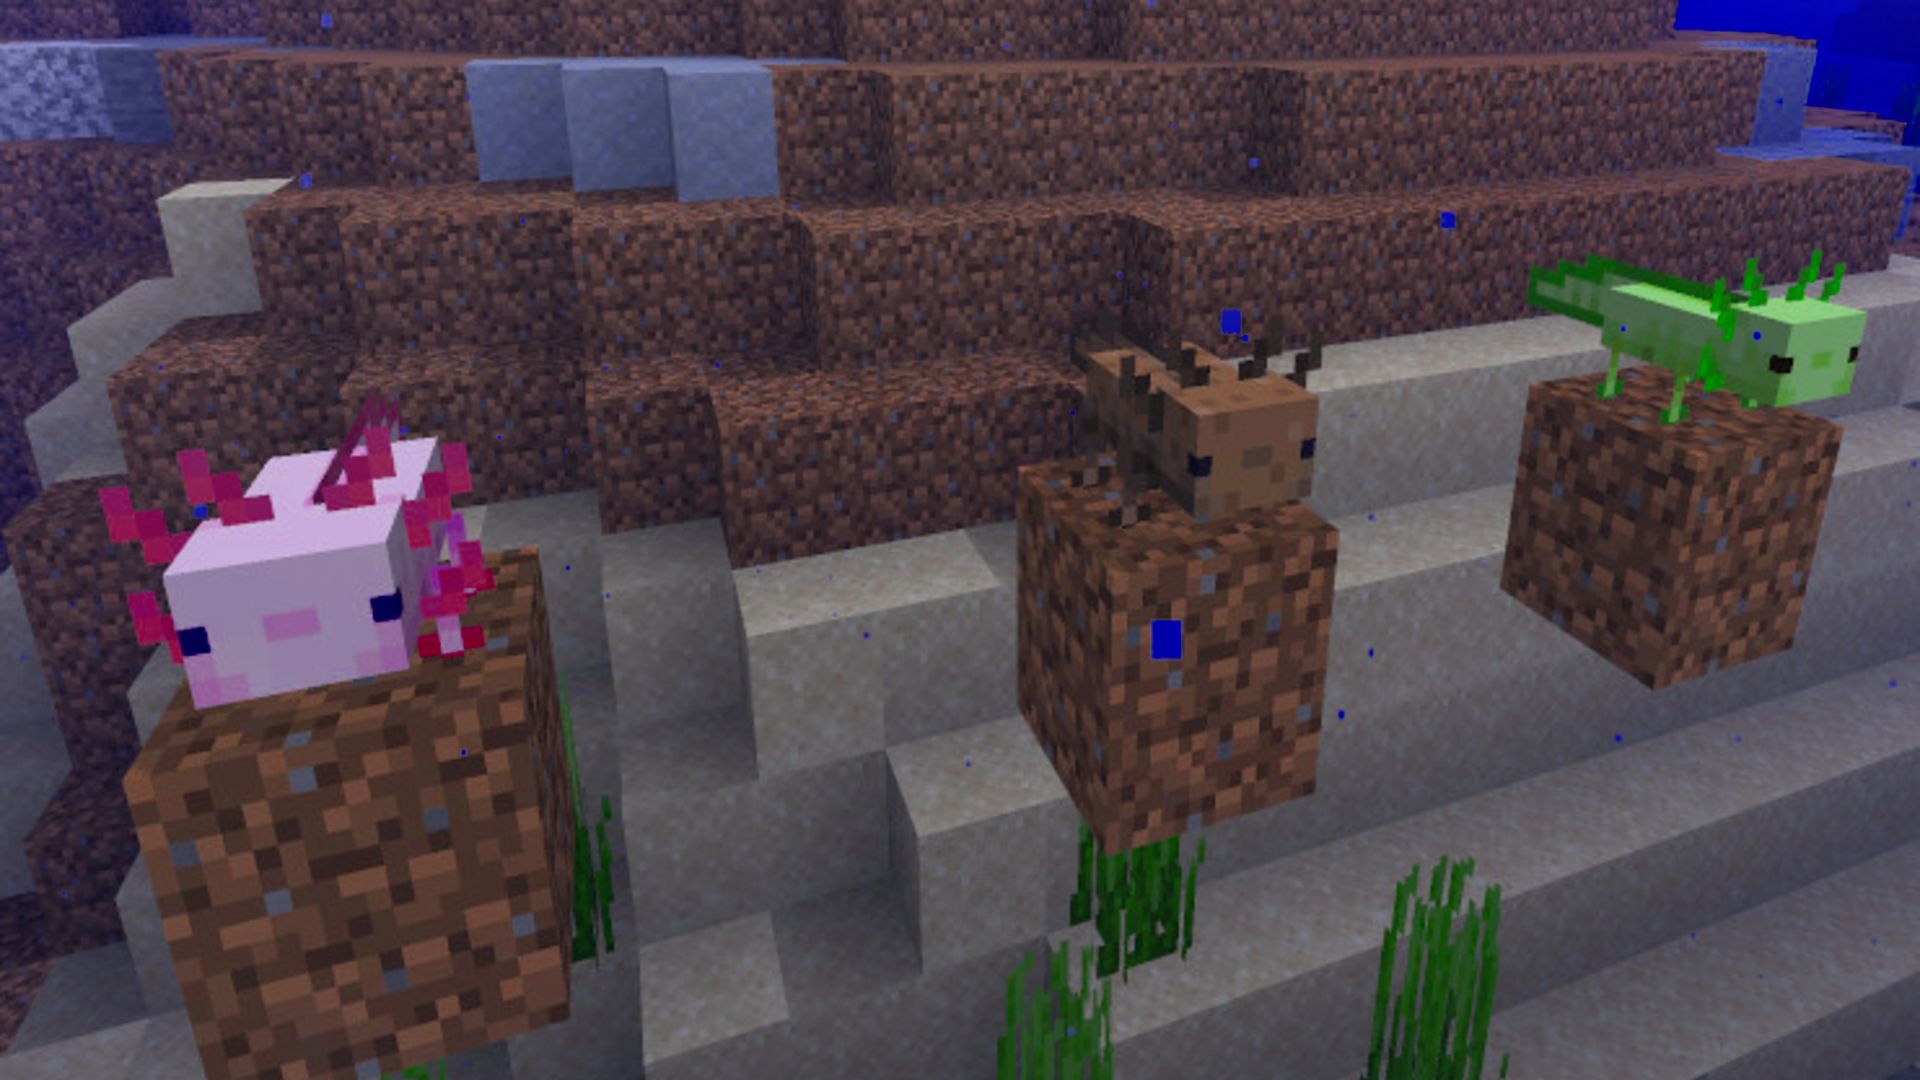 New Mobs Coming To Minecraft: Glow Squid, Axolotls, The Warden And Mountain Goats